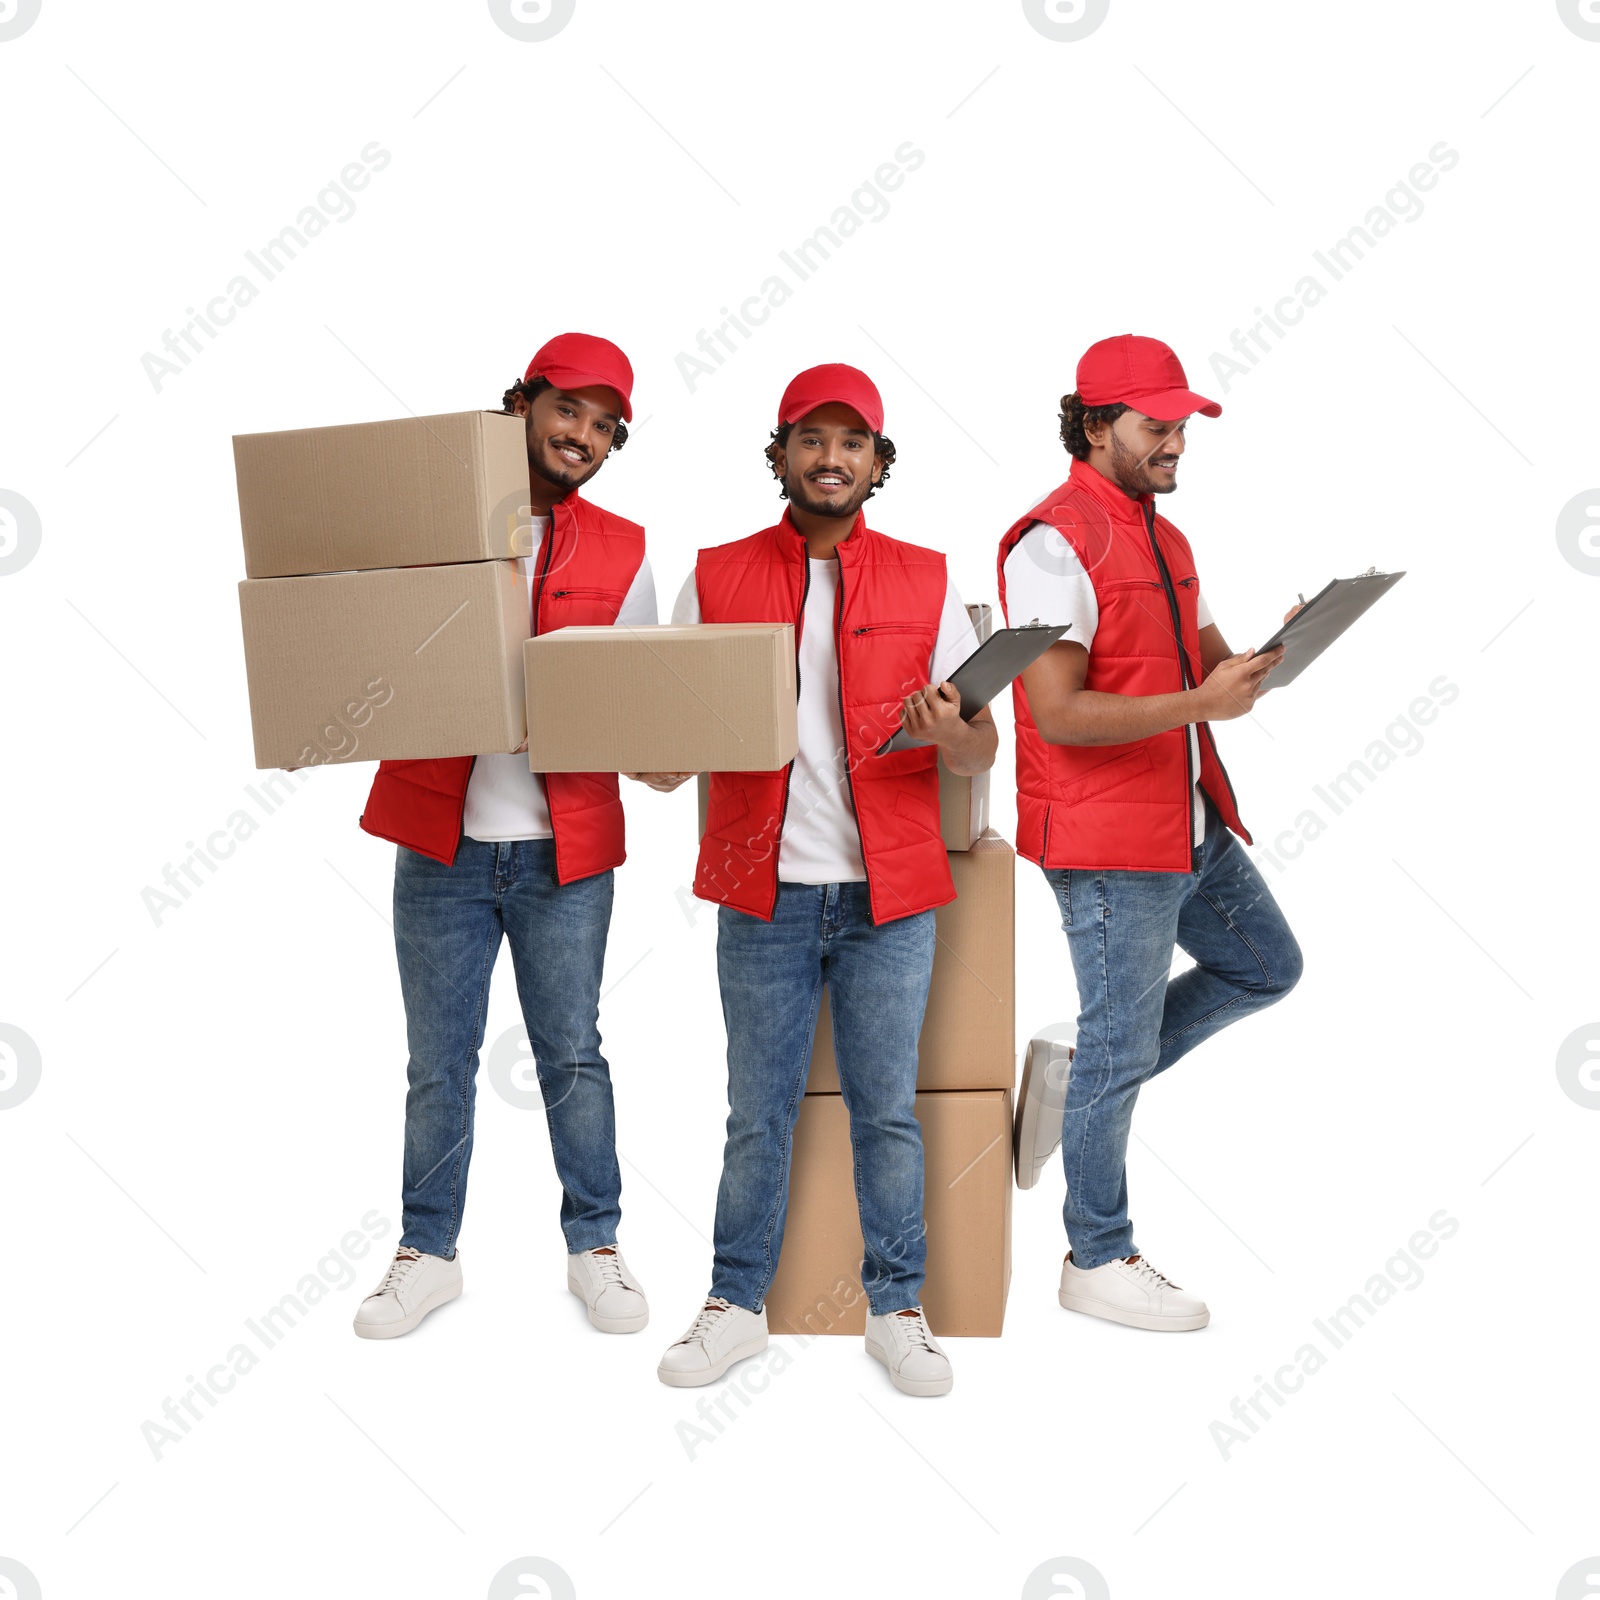 Image of Delivery service. Happy courier with cardboard boxes on white background, collage of photos